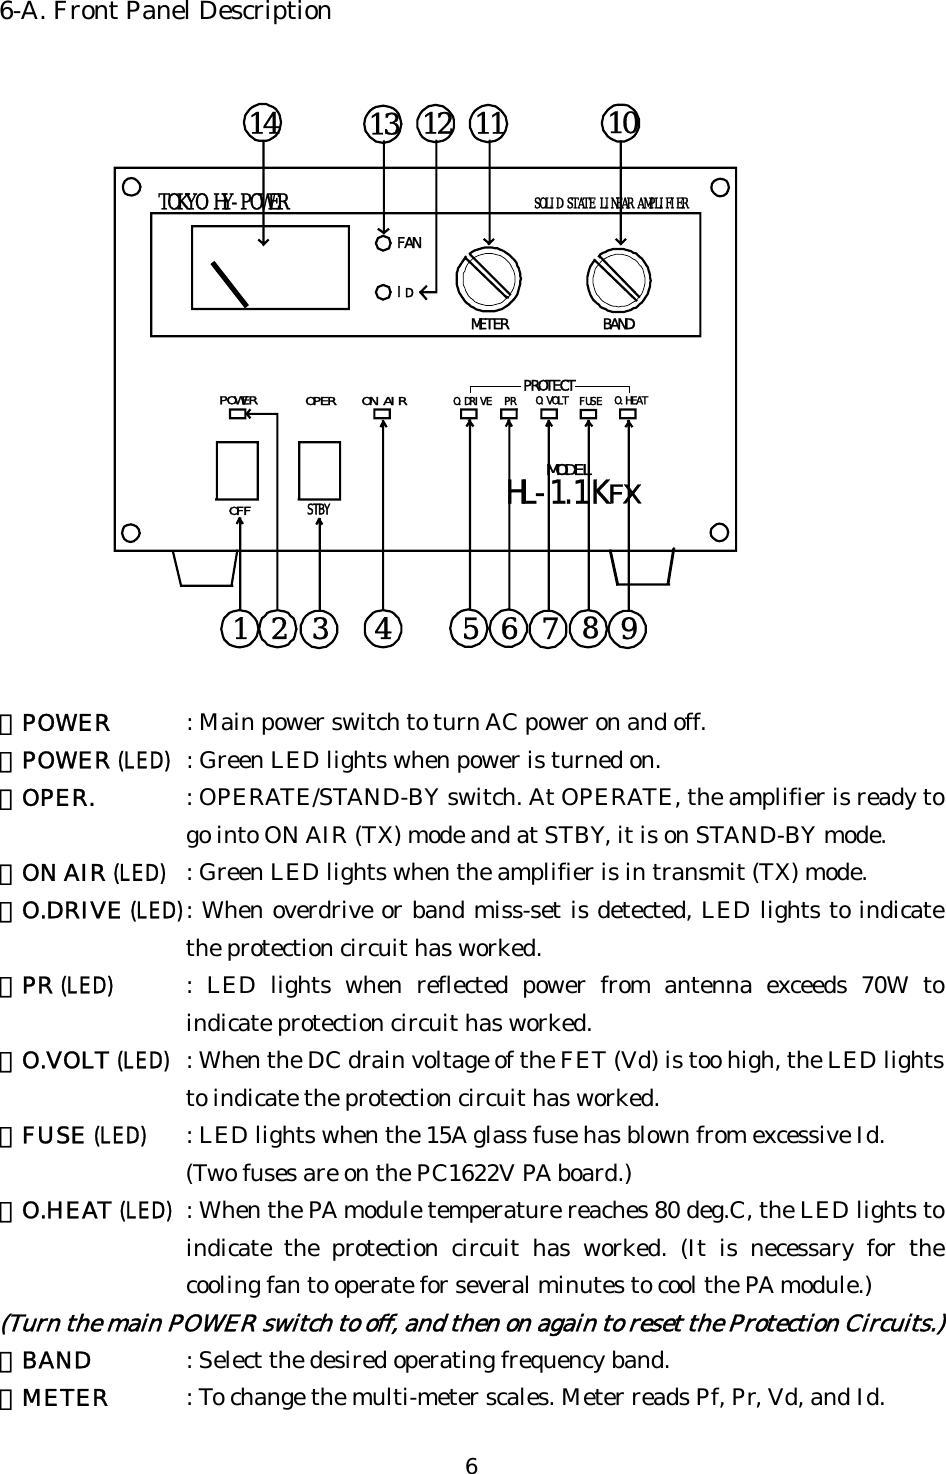 6-A. Front Panel Description POWER OPER ON AIROFFSTBYO.DRIVE PR O.VOLT FUSE O.HEATPROTECTMETER BANDHL-1. KFXMODELSOLID STATE LINEAR AMPLIFIERTOKYO HY-POWER112134 57689101IFAND14 1213 ①POWER  : Main power switch to turn AC power on and off. ②POWER (LED)  : Green LED lights when power is turned on.   ③OPER.  : OPERATE/STAND-BY switch. At OPERATE, the amplifier is ready to go into ON AIR (TX) mode and at STBY, it is on STAND-BY mode. ④ON AIR (LED)  : Green LED lights when the amplifier is in transmit (TX) mode. ⑤O.DRIVE (LED) : When overdrive or band miss-set is detected, LED lights to indicate the protection circuit has worked. ⑥PR (LED) : LED lights when reflected power from antenna exceeds 70W to indicate protection circuit has worked. ⑦O.VOLT (LED) : When the DC drain voltage of the FET (Vd) is too high, the LED lights to indicate the protection circuit has worked. ⑧FUSE (LED) : LED lights when the 15A glass fuse has blown from excessive Id. (Two fuses are on the PC1622V PA board.) ⑨O.HEAT (LED) : When the PA module temperature reaches 80 deg.C, the LED lights to indicate the protection circuit has worked. (It is necessary for the cooling fan to operate for several minutes to cool the PA module.) (Turn the main POWER switch to off, and then on again to reset the Protection Circuits.) ⑩BAND  : Select the desired operating frequency band. ⑪METER  : To change the multi-meter scales. Meter reads Pf, Pr, Vd, and Id. 6 